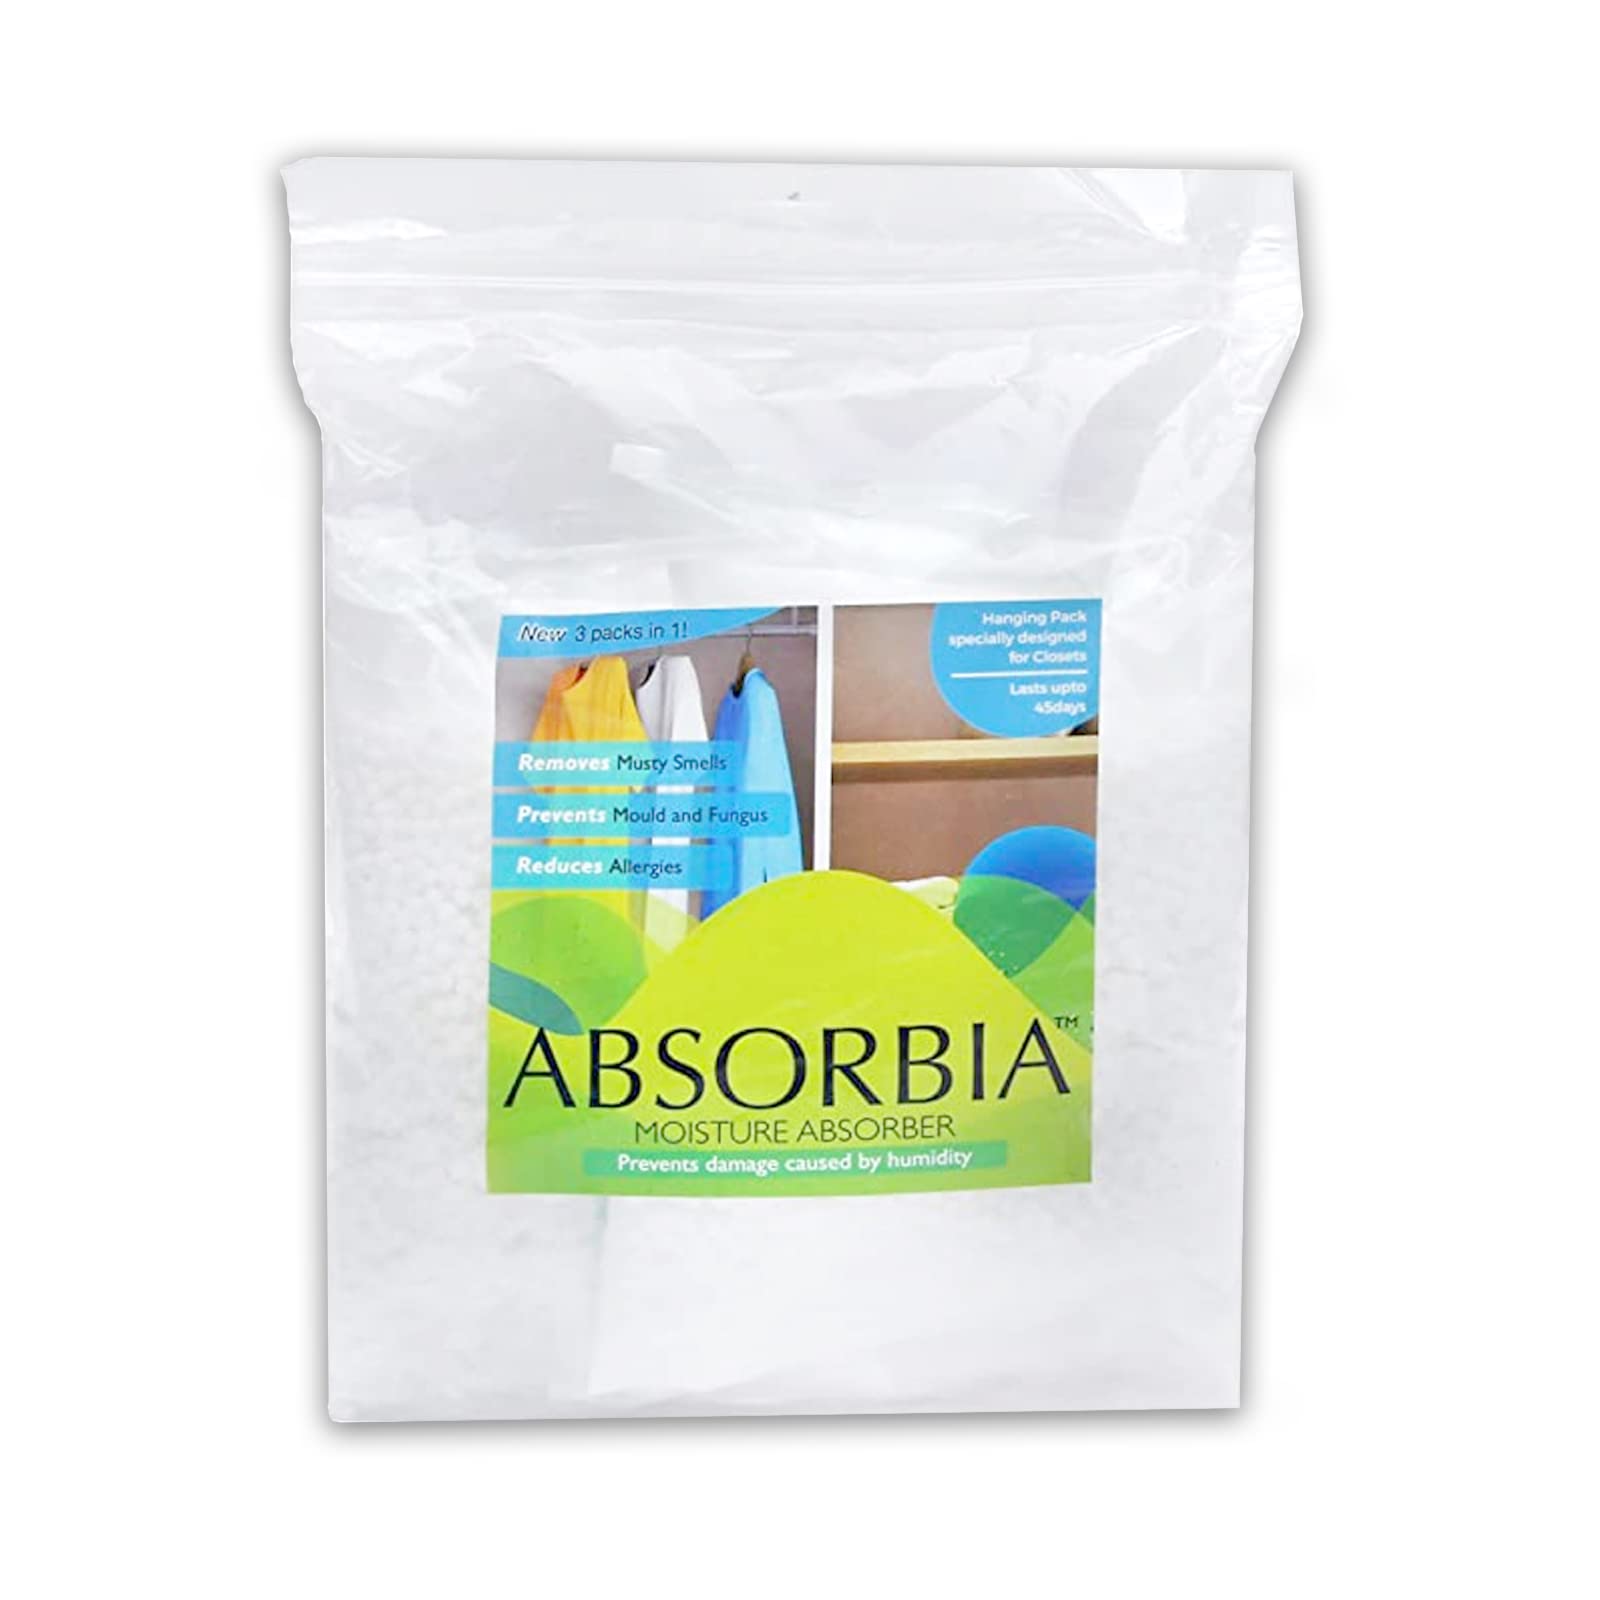 Absorbia Moisture Absorber Hanging Pouch | Family Pack of 3 (400ml Each) | Dehumidifier for Wardrobe, Closet & Bathroom| Keeps Clothes Fresh & Crisp | Fights Against Moisture, Mould & Musty Smells…